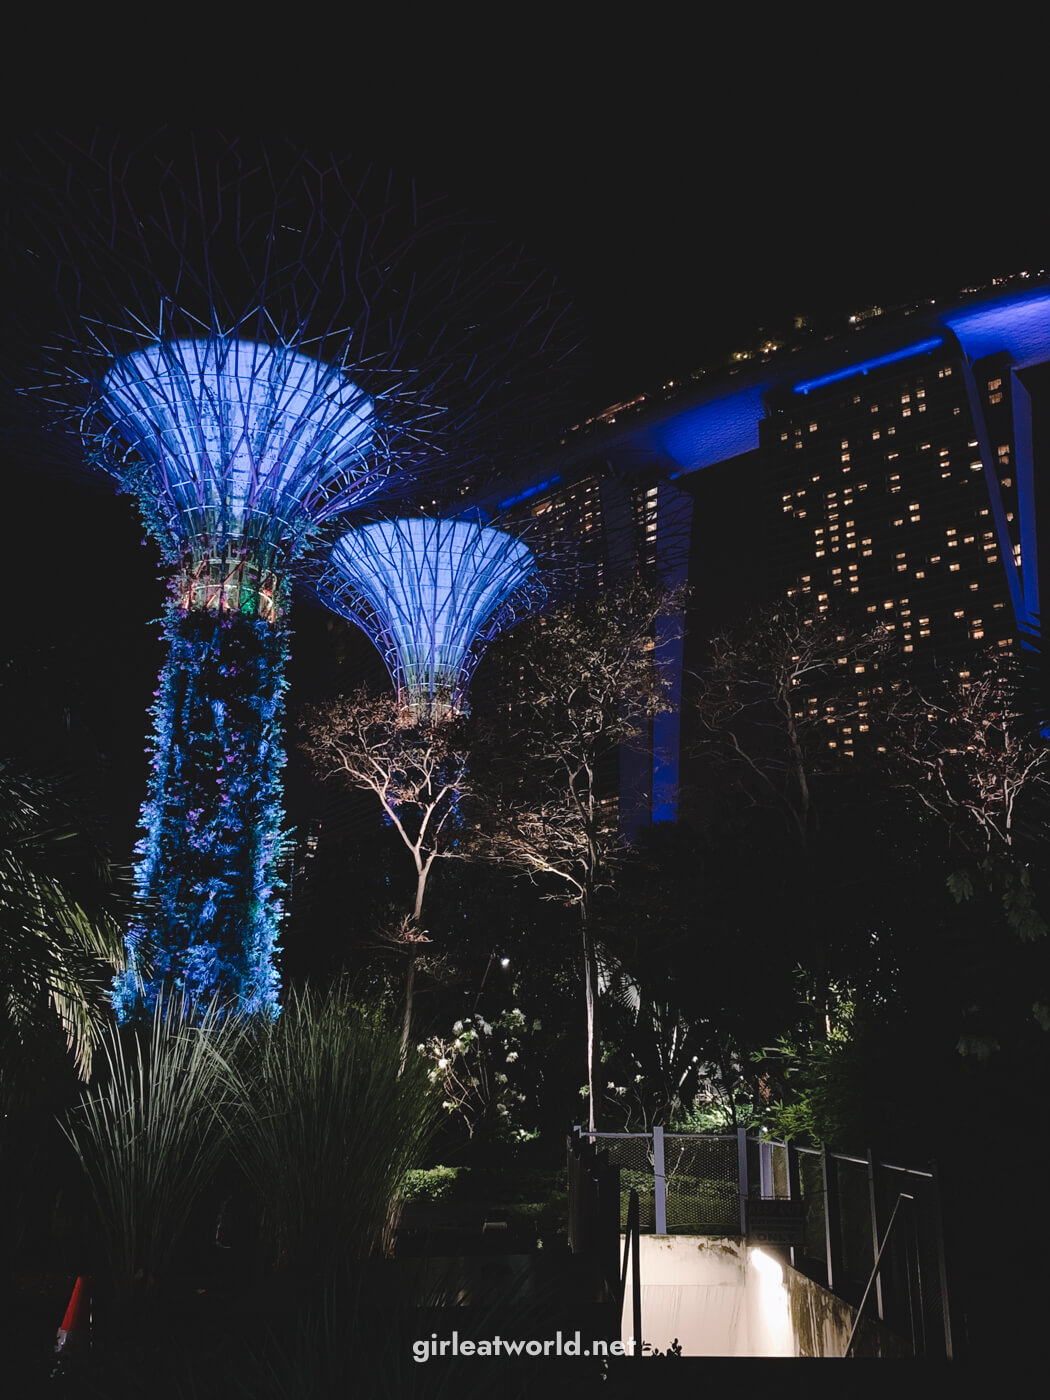 Marina Bay Sands and Supertree from Gardens by the Bay